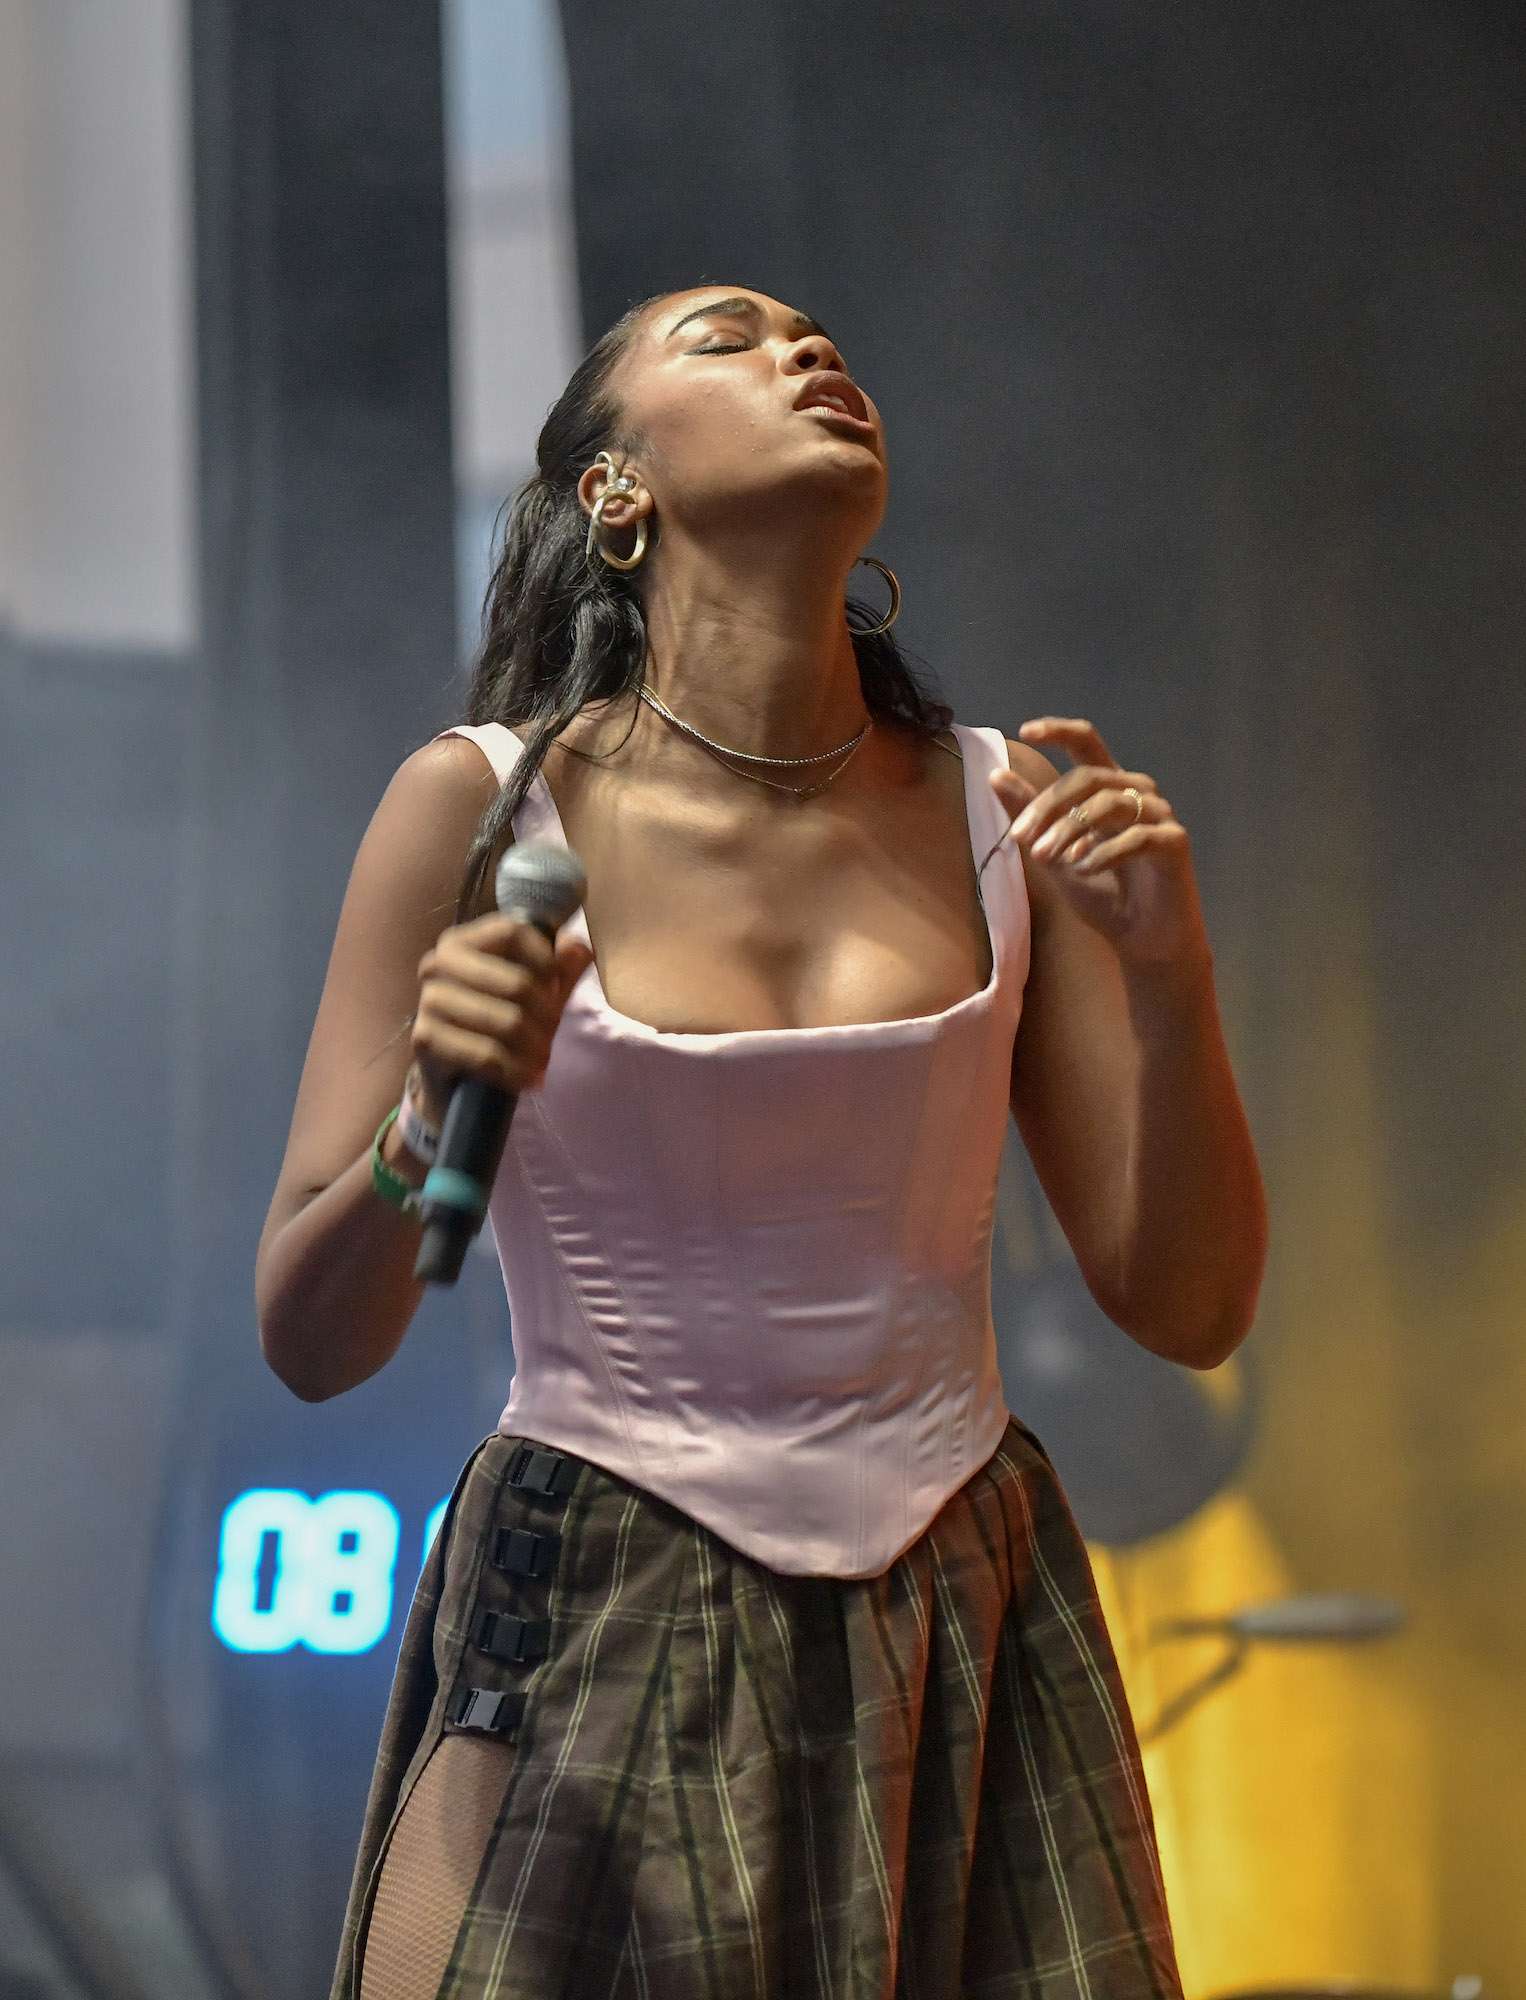 Amber Mark Live At Pitchfork [GALLERY] 9